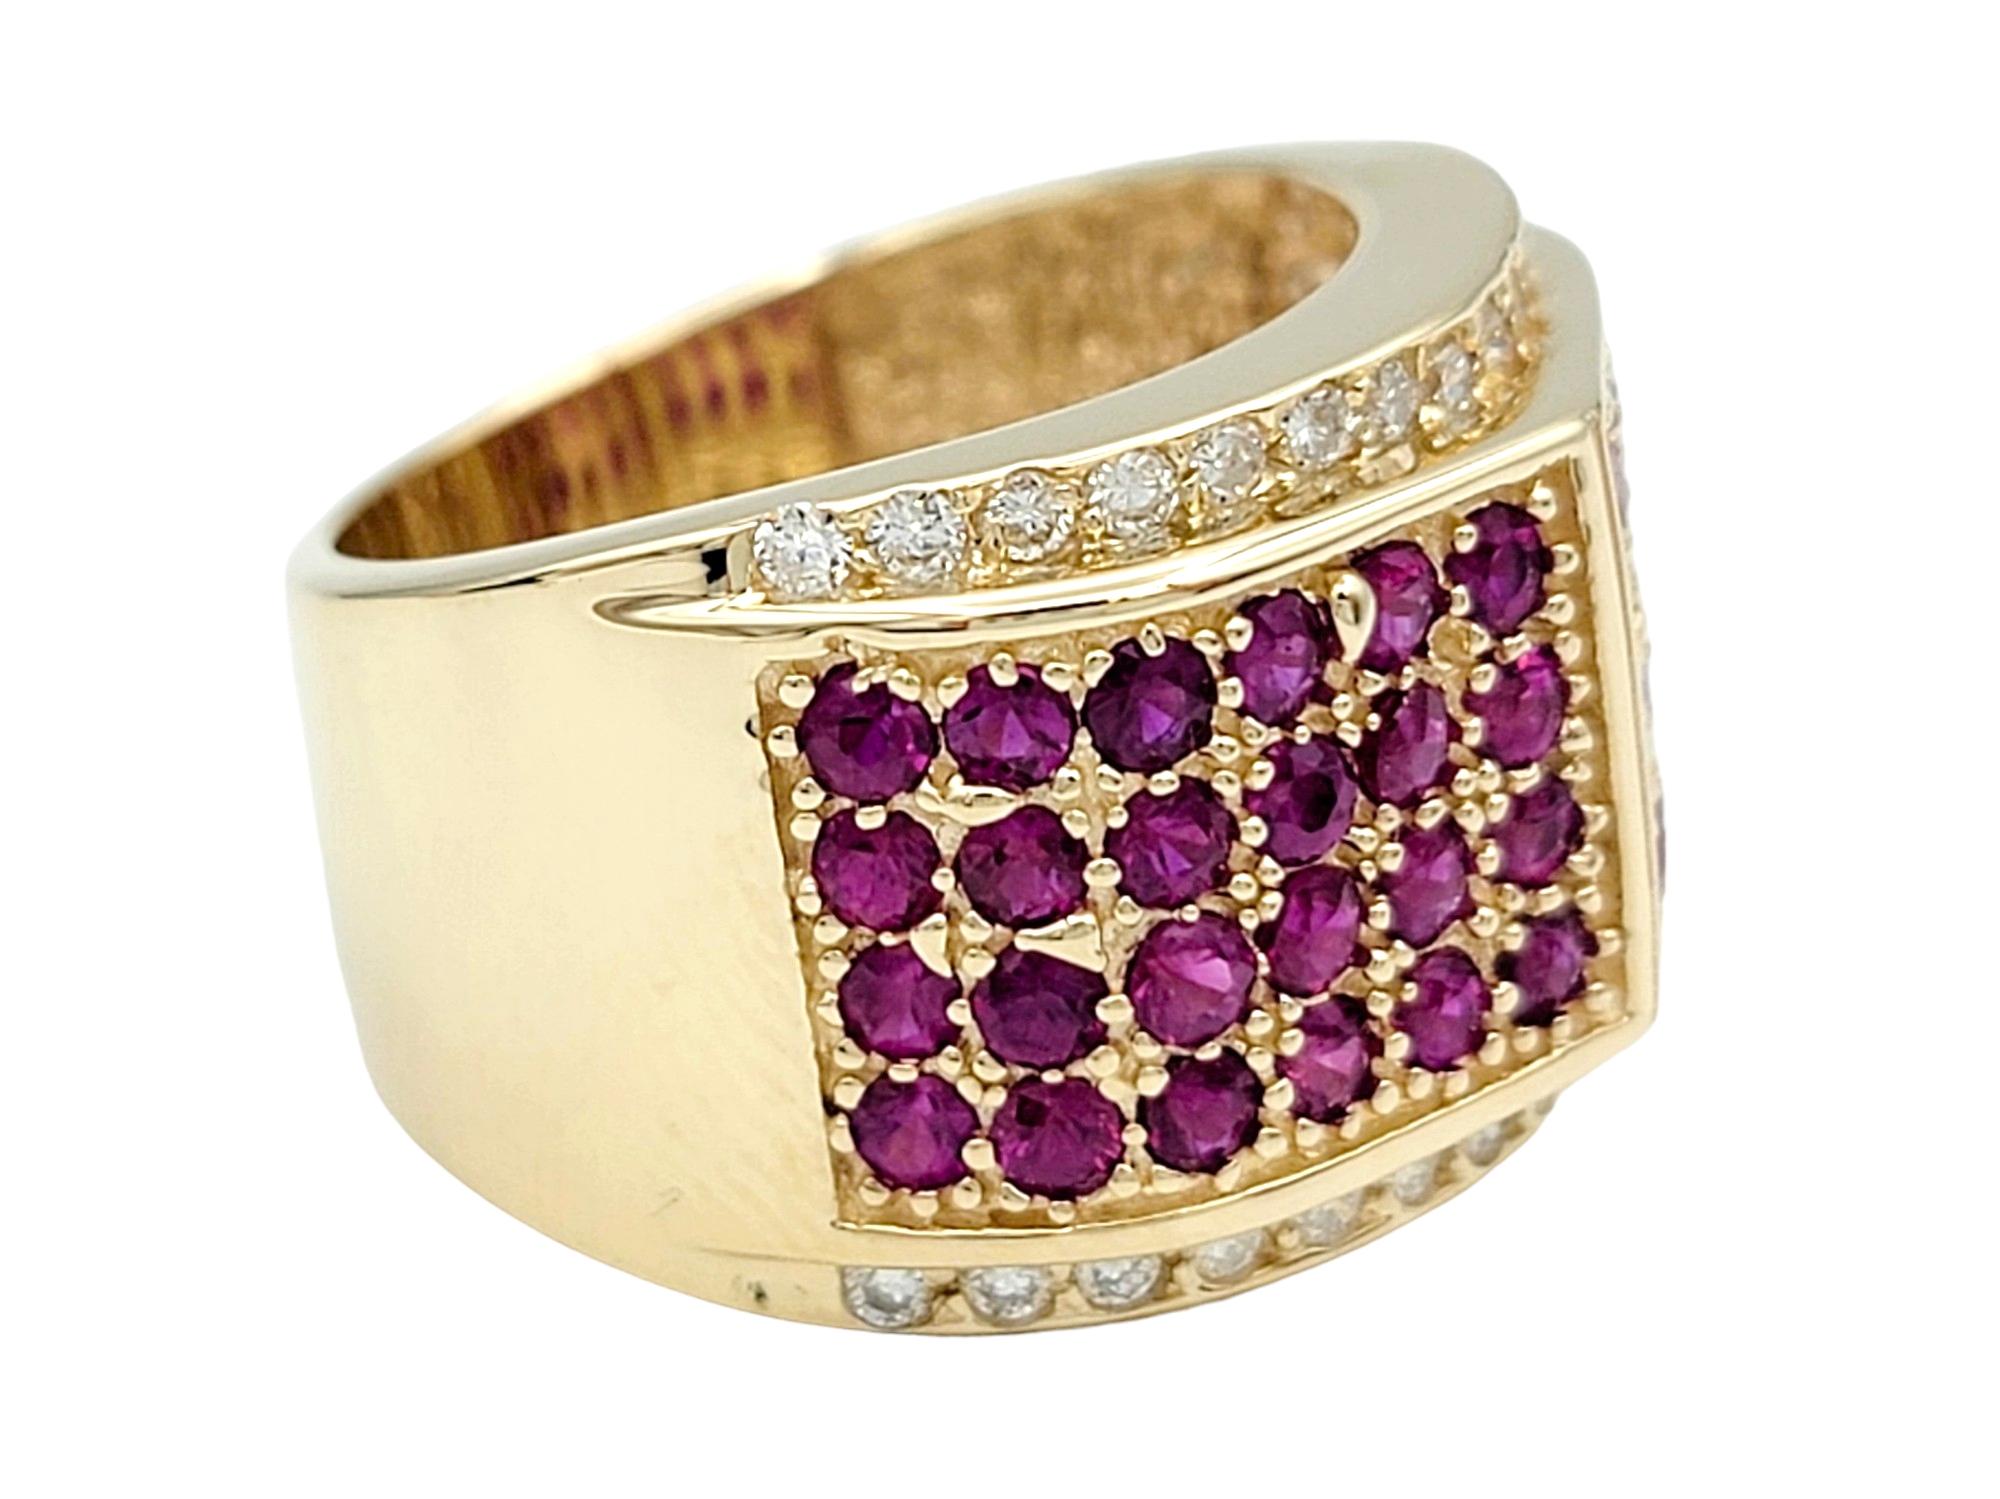 Ring Size: 7.25

This gorgeous diamond and lab sapphire band ring, set in lustrous 14 karat yellow gold, is a striking and luxurious piece. The wide band design allows for a bold statement, and the intricate arrangement of pink lab sapphires